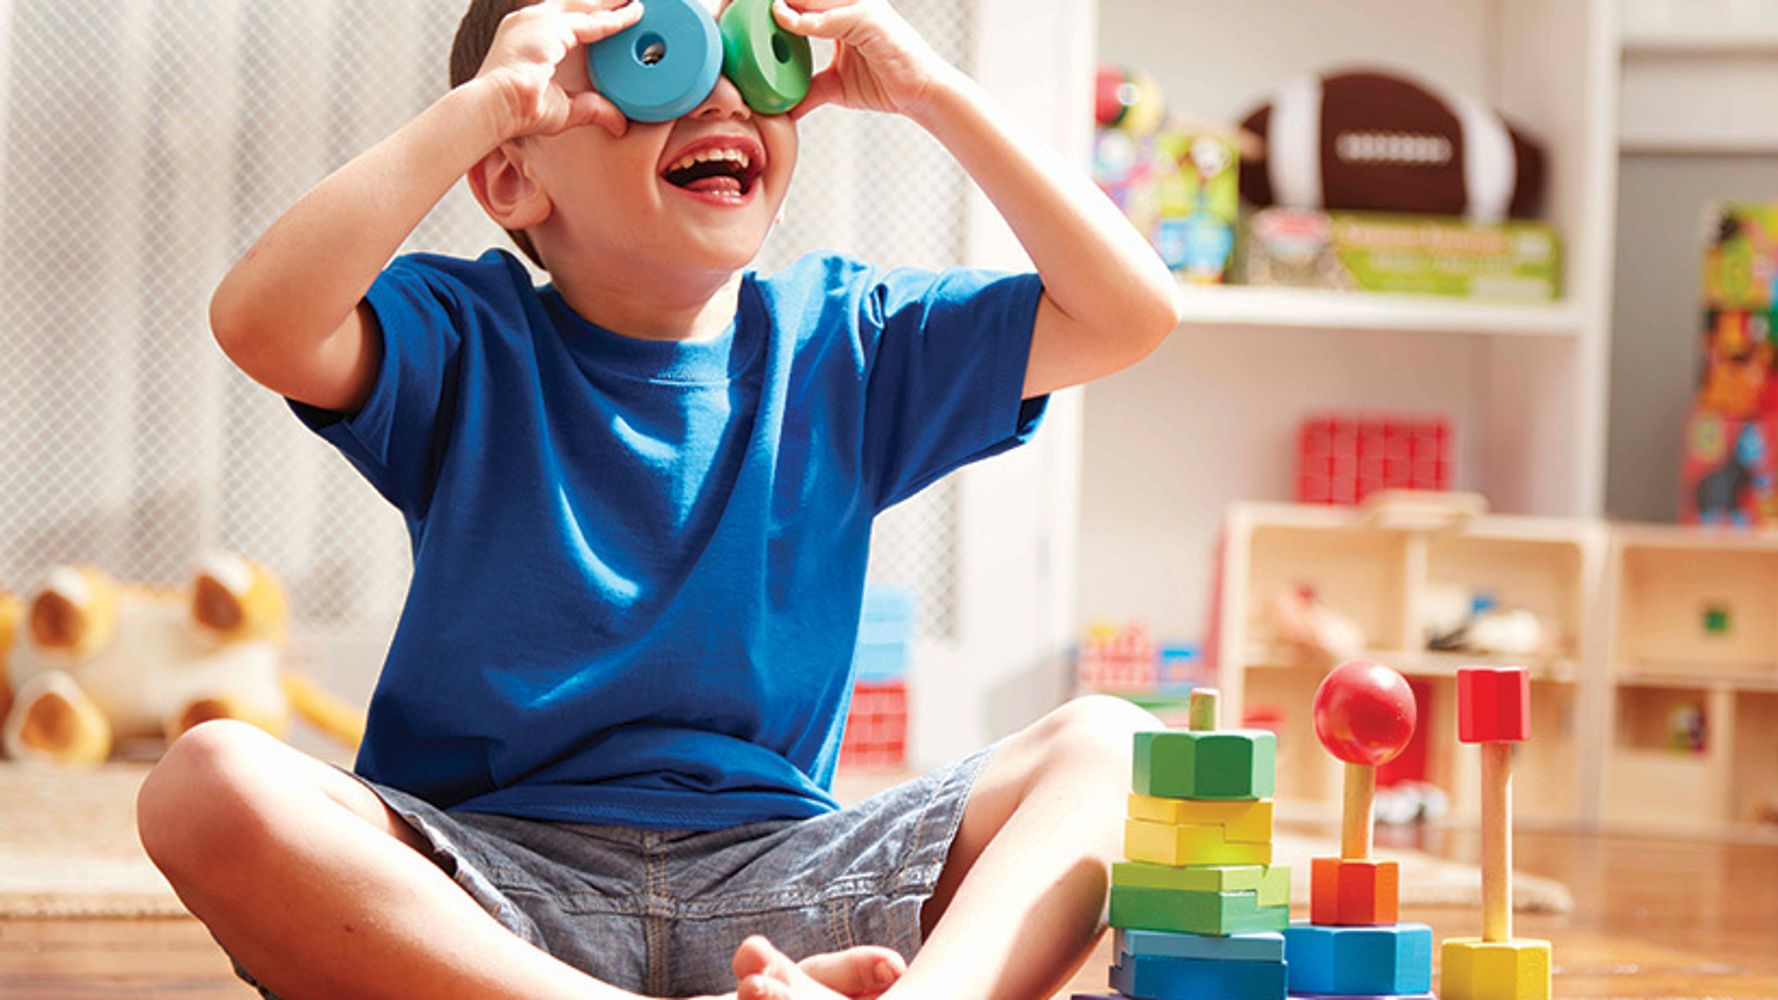 5 Fun and Creative Ways to Spark Your Child’s Imagination